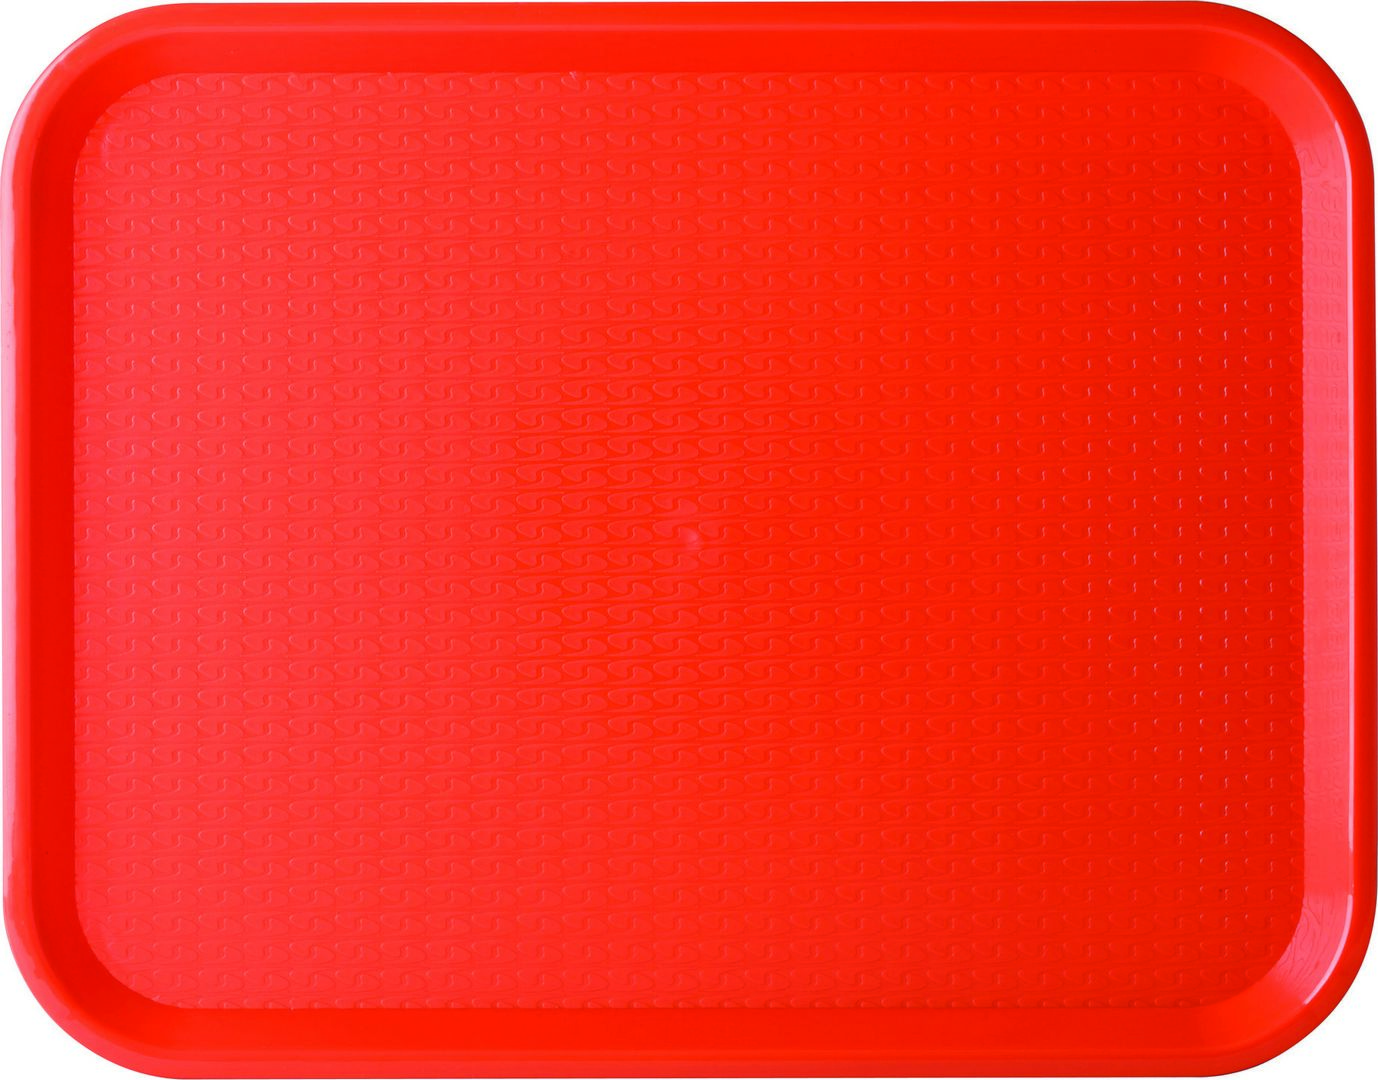 Red Cafe Tray 14 x 10